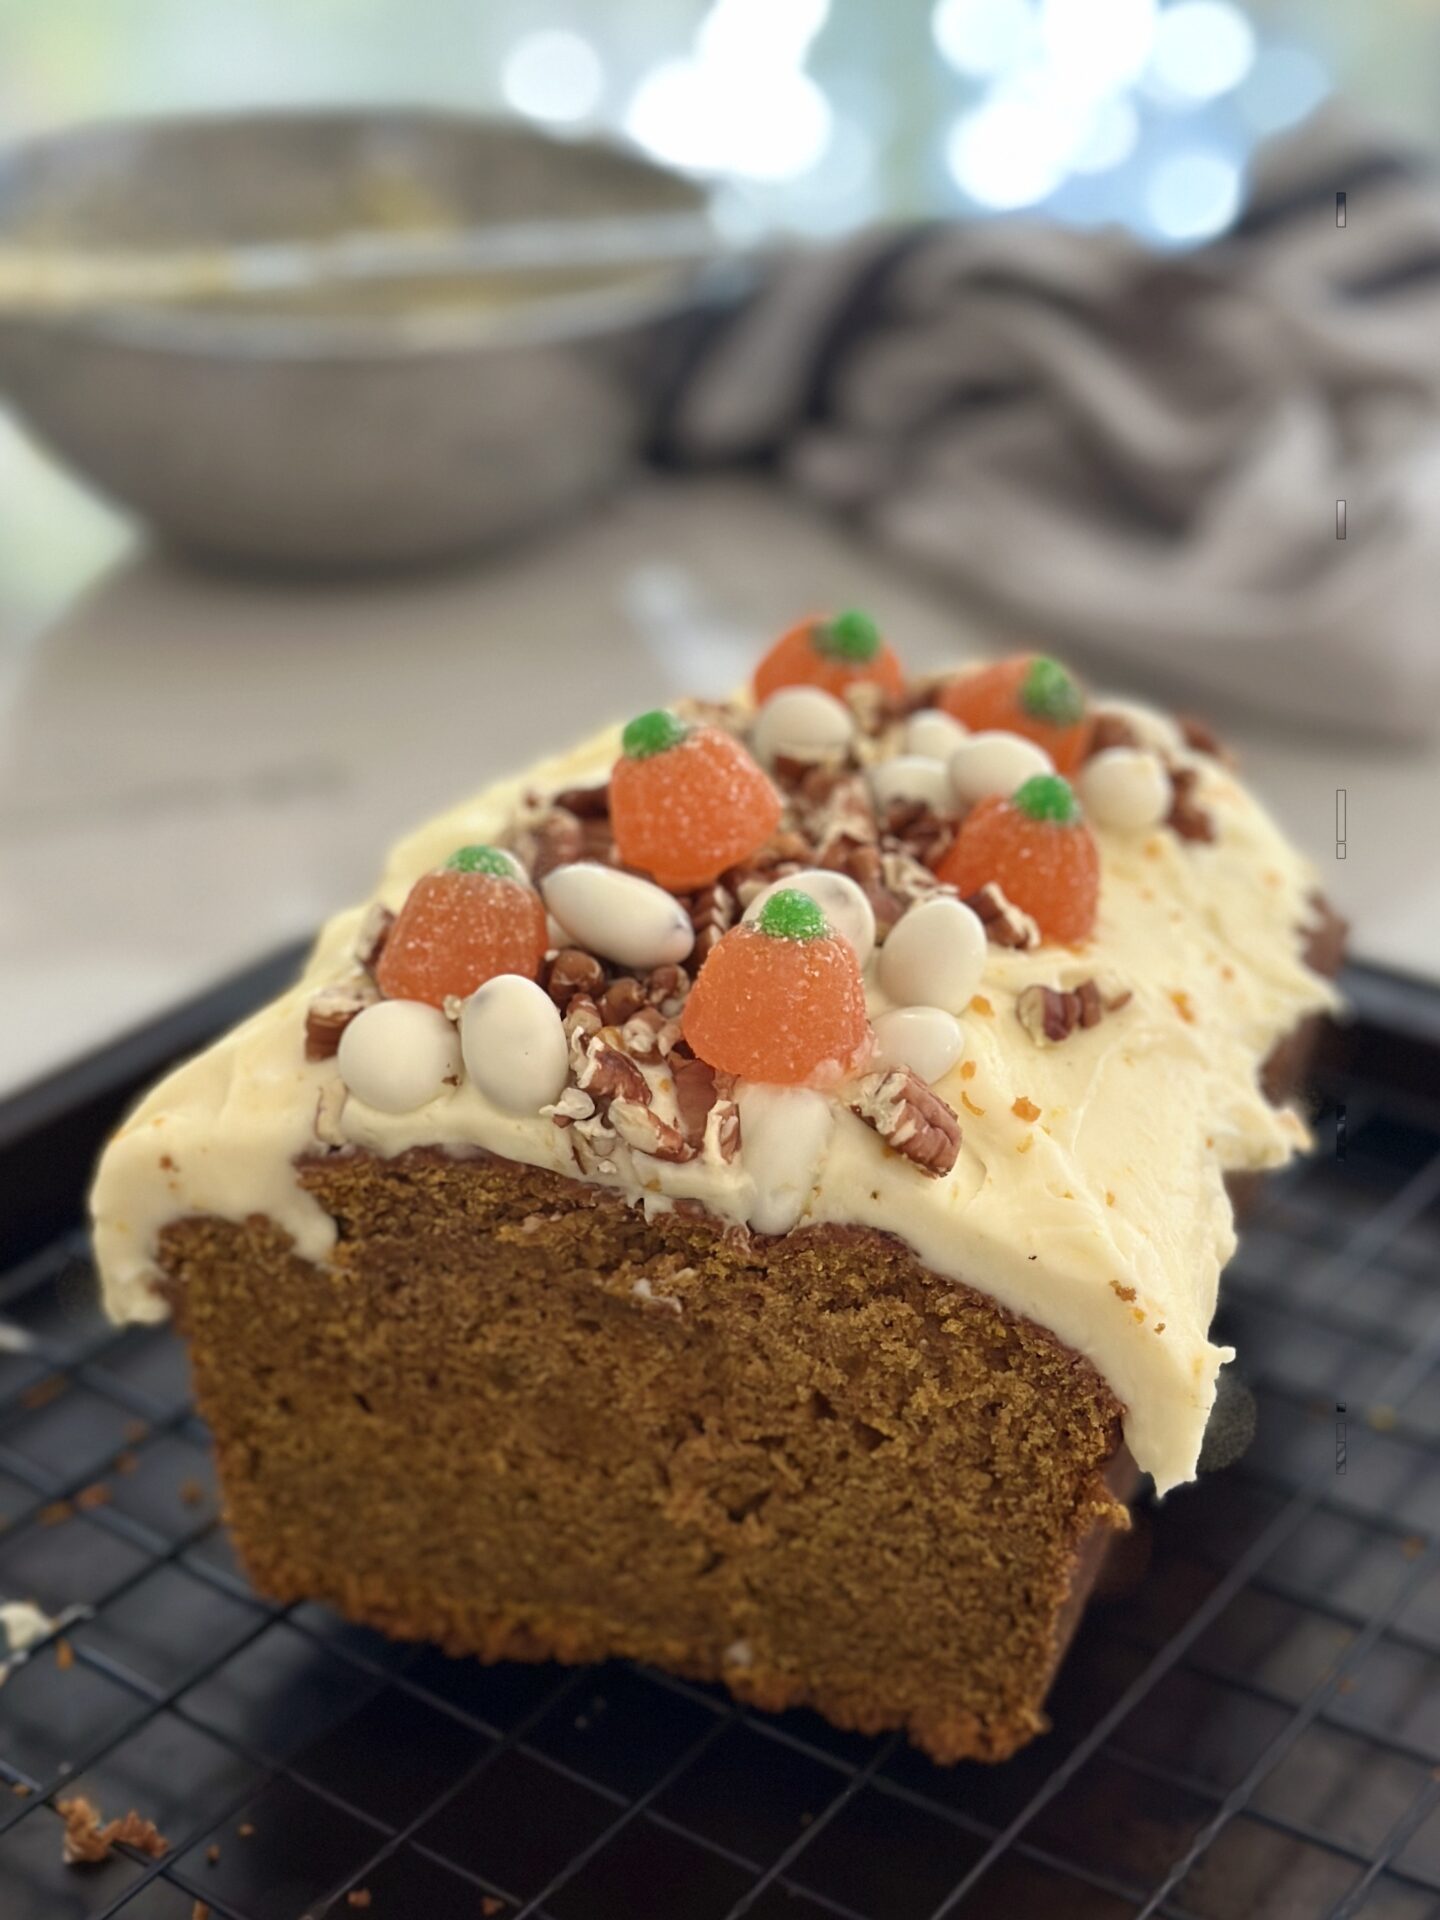 A loaf of pumpkin bread with orange cream cheese frosting is cut into, revealing the tender moist interior